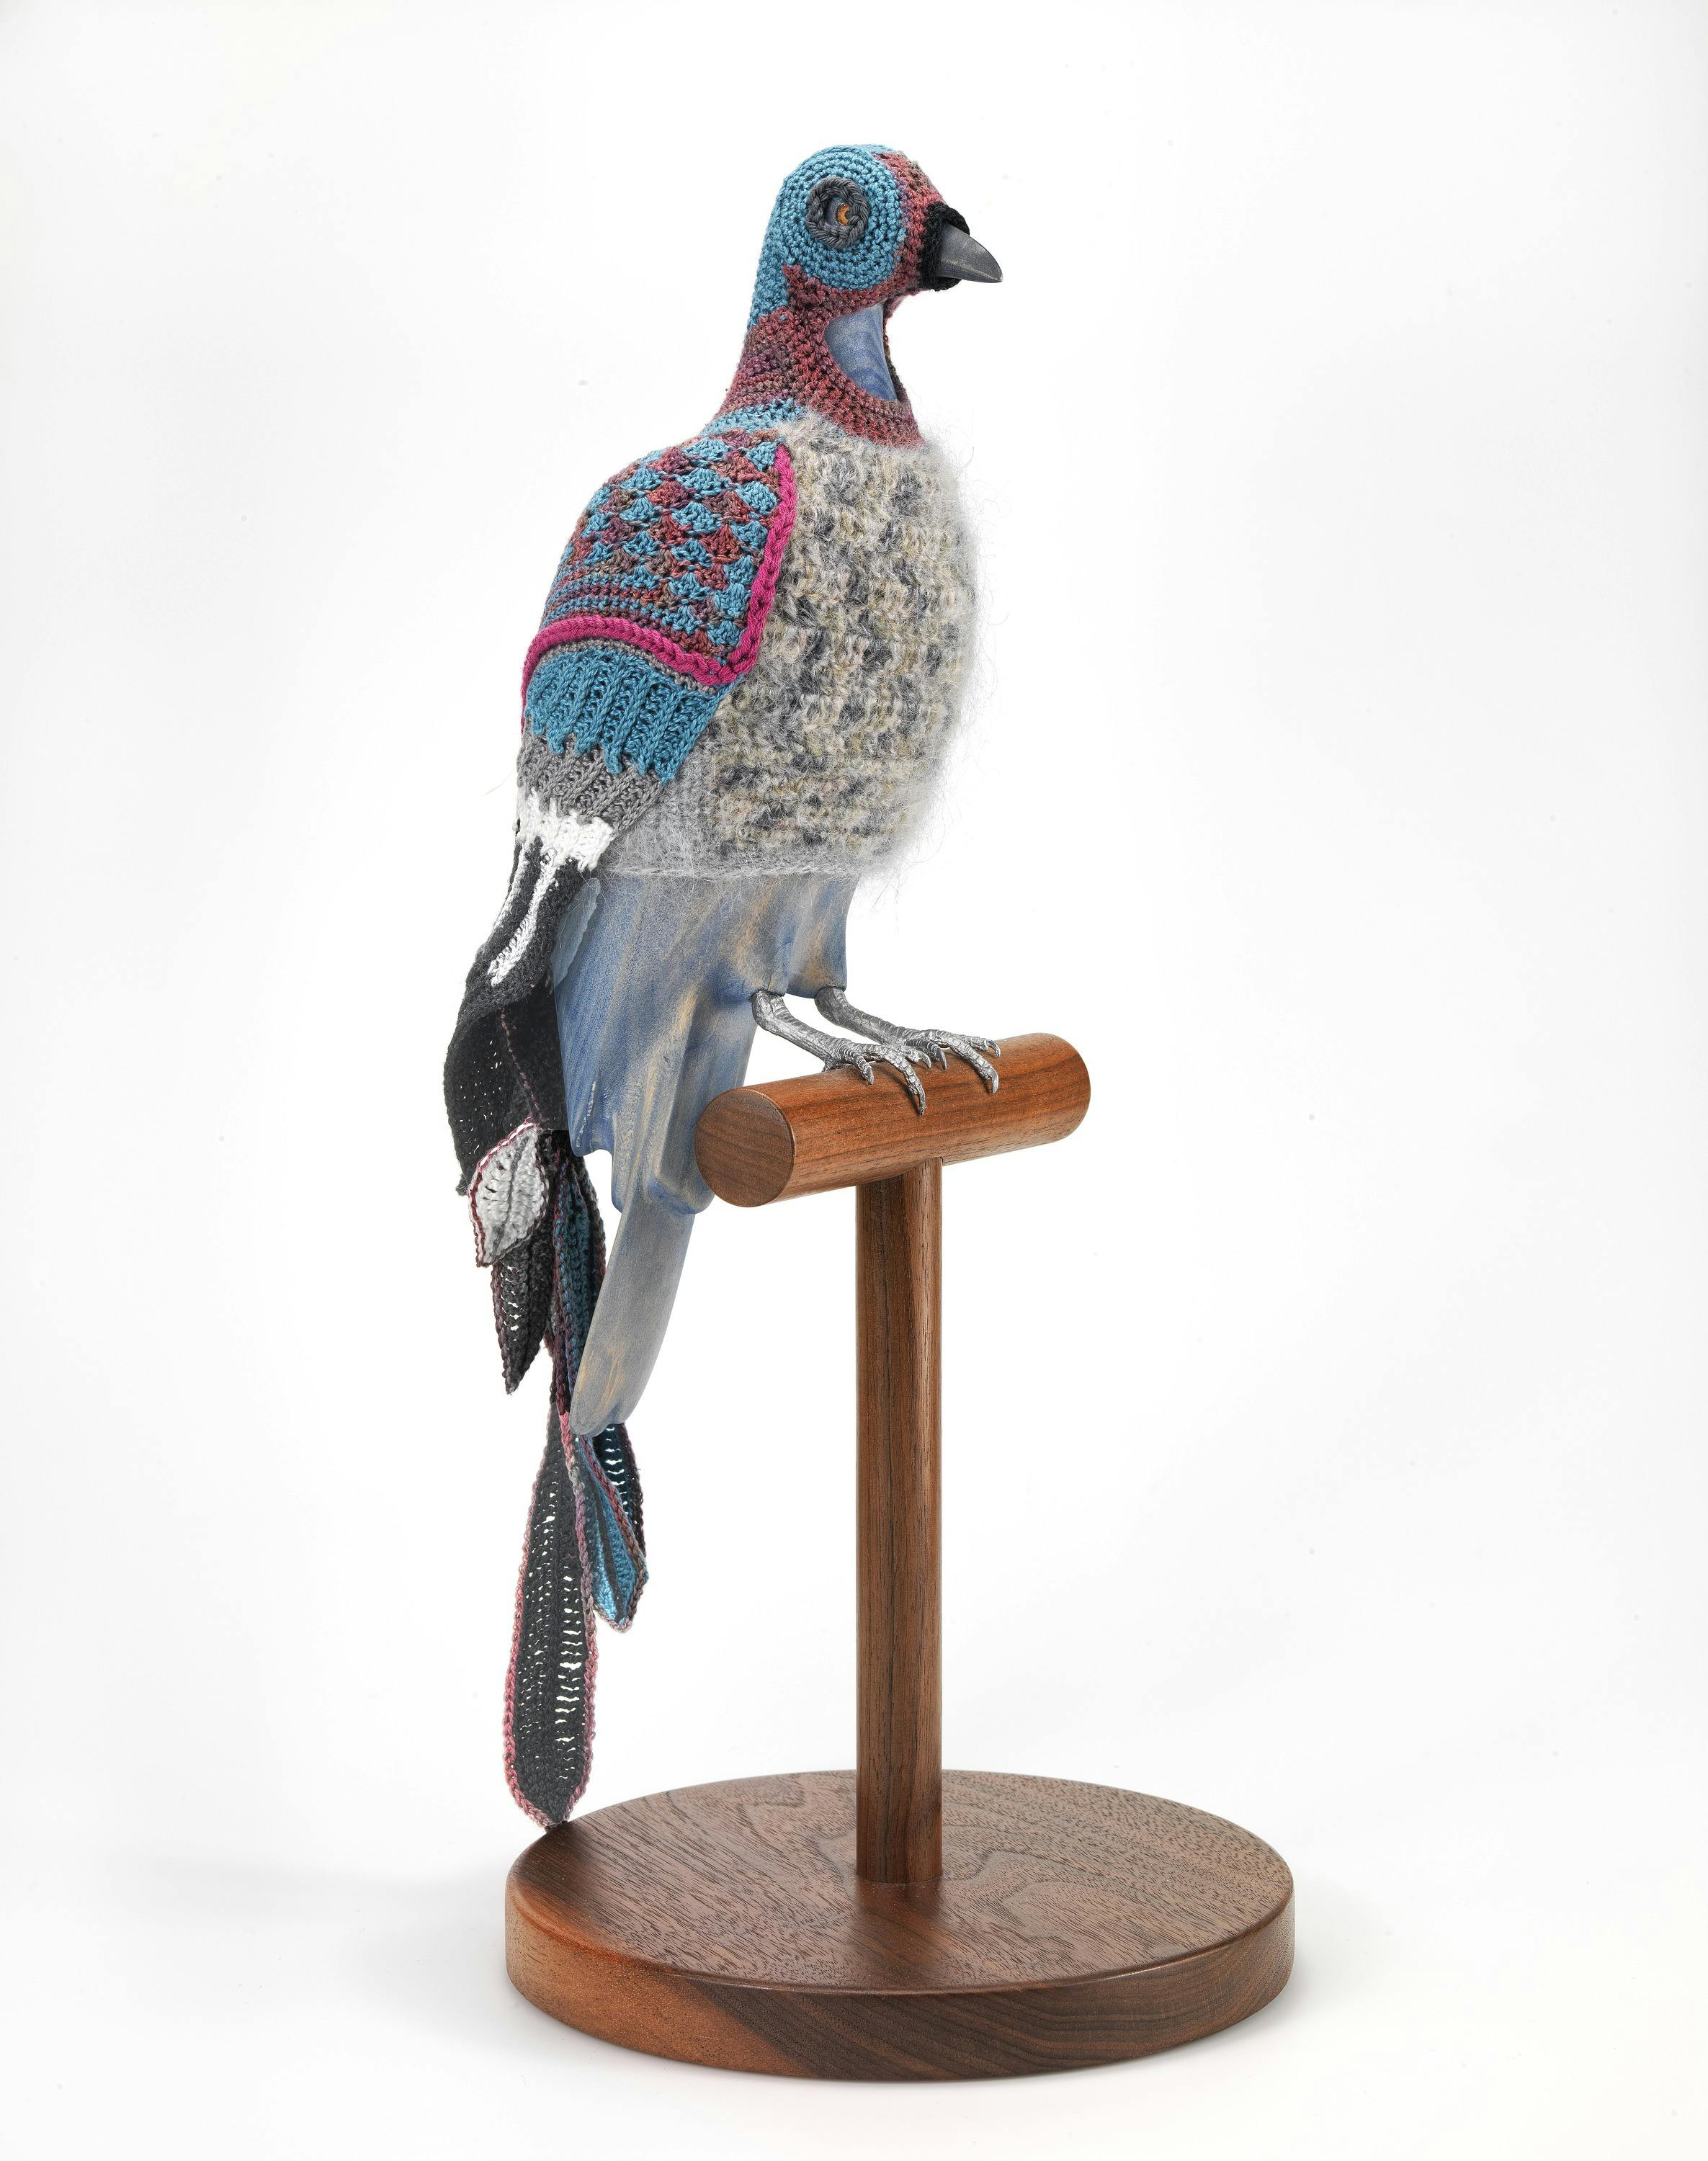 Model of a pigeon on a wooden pedestal wearing a bright blue, pink and grey knitted suit